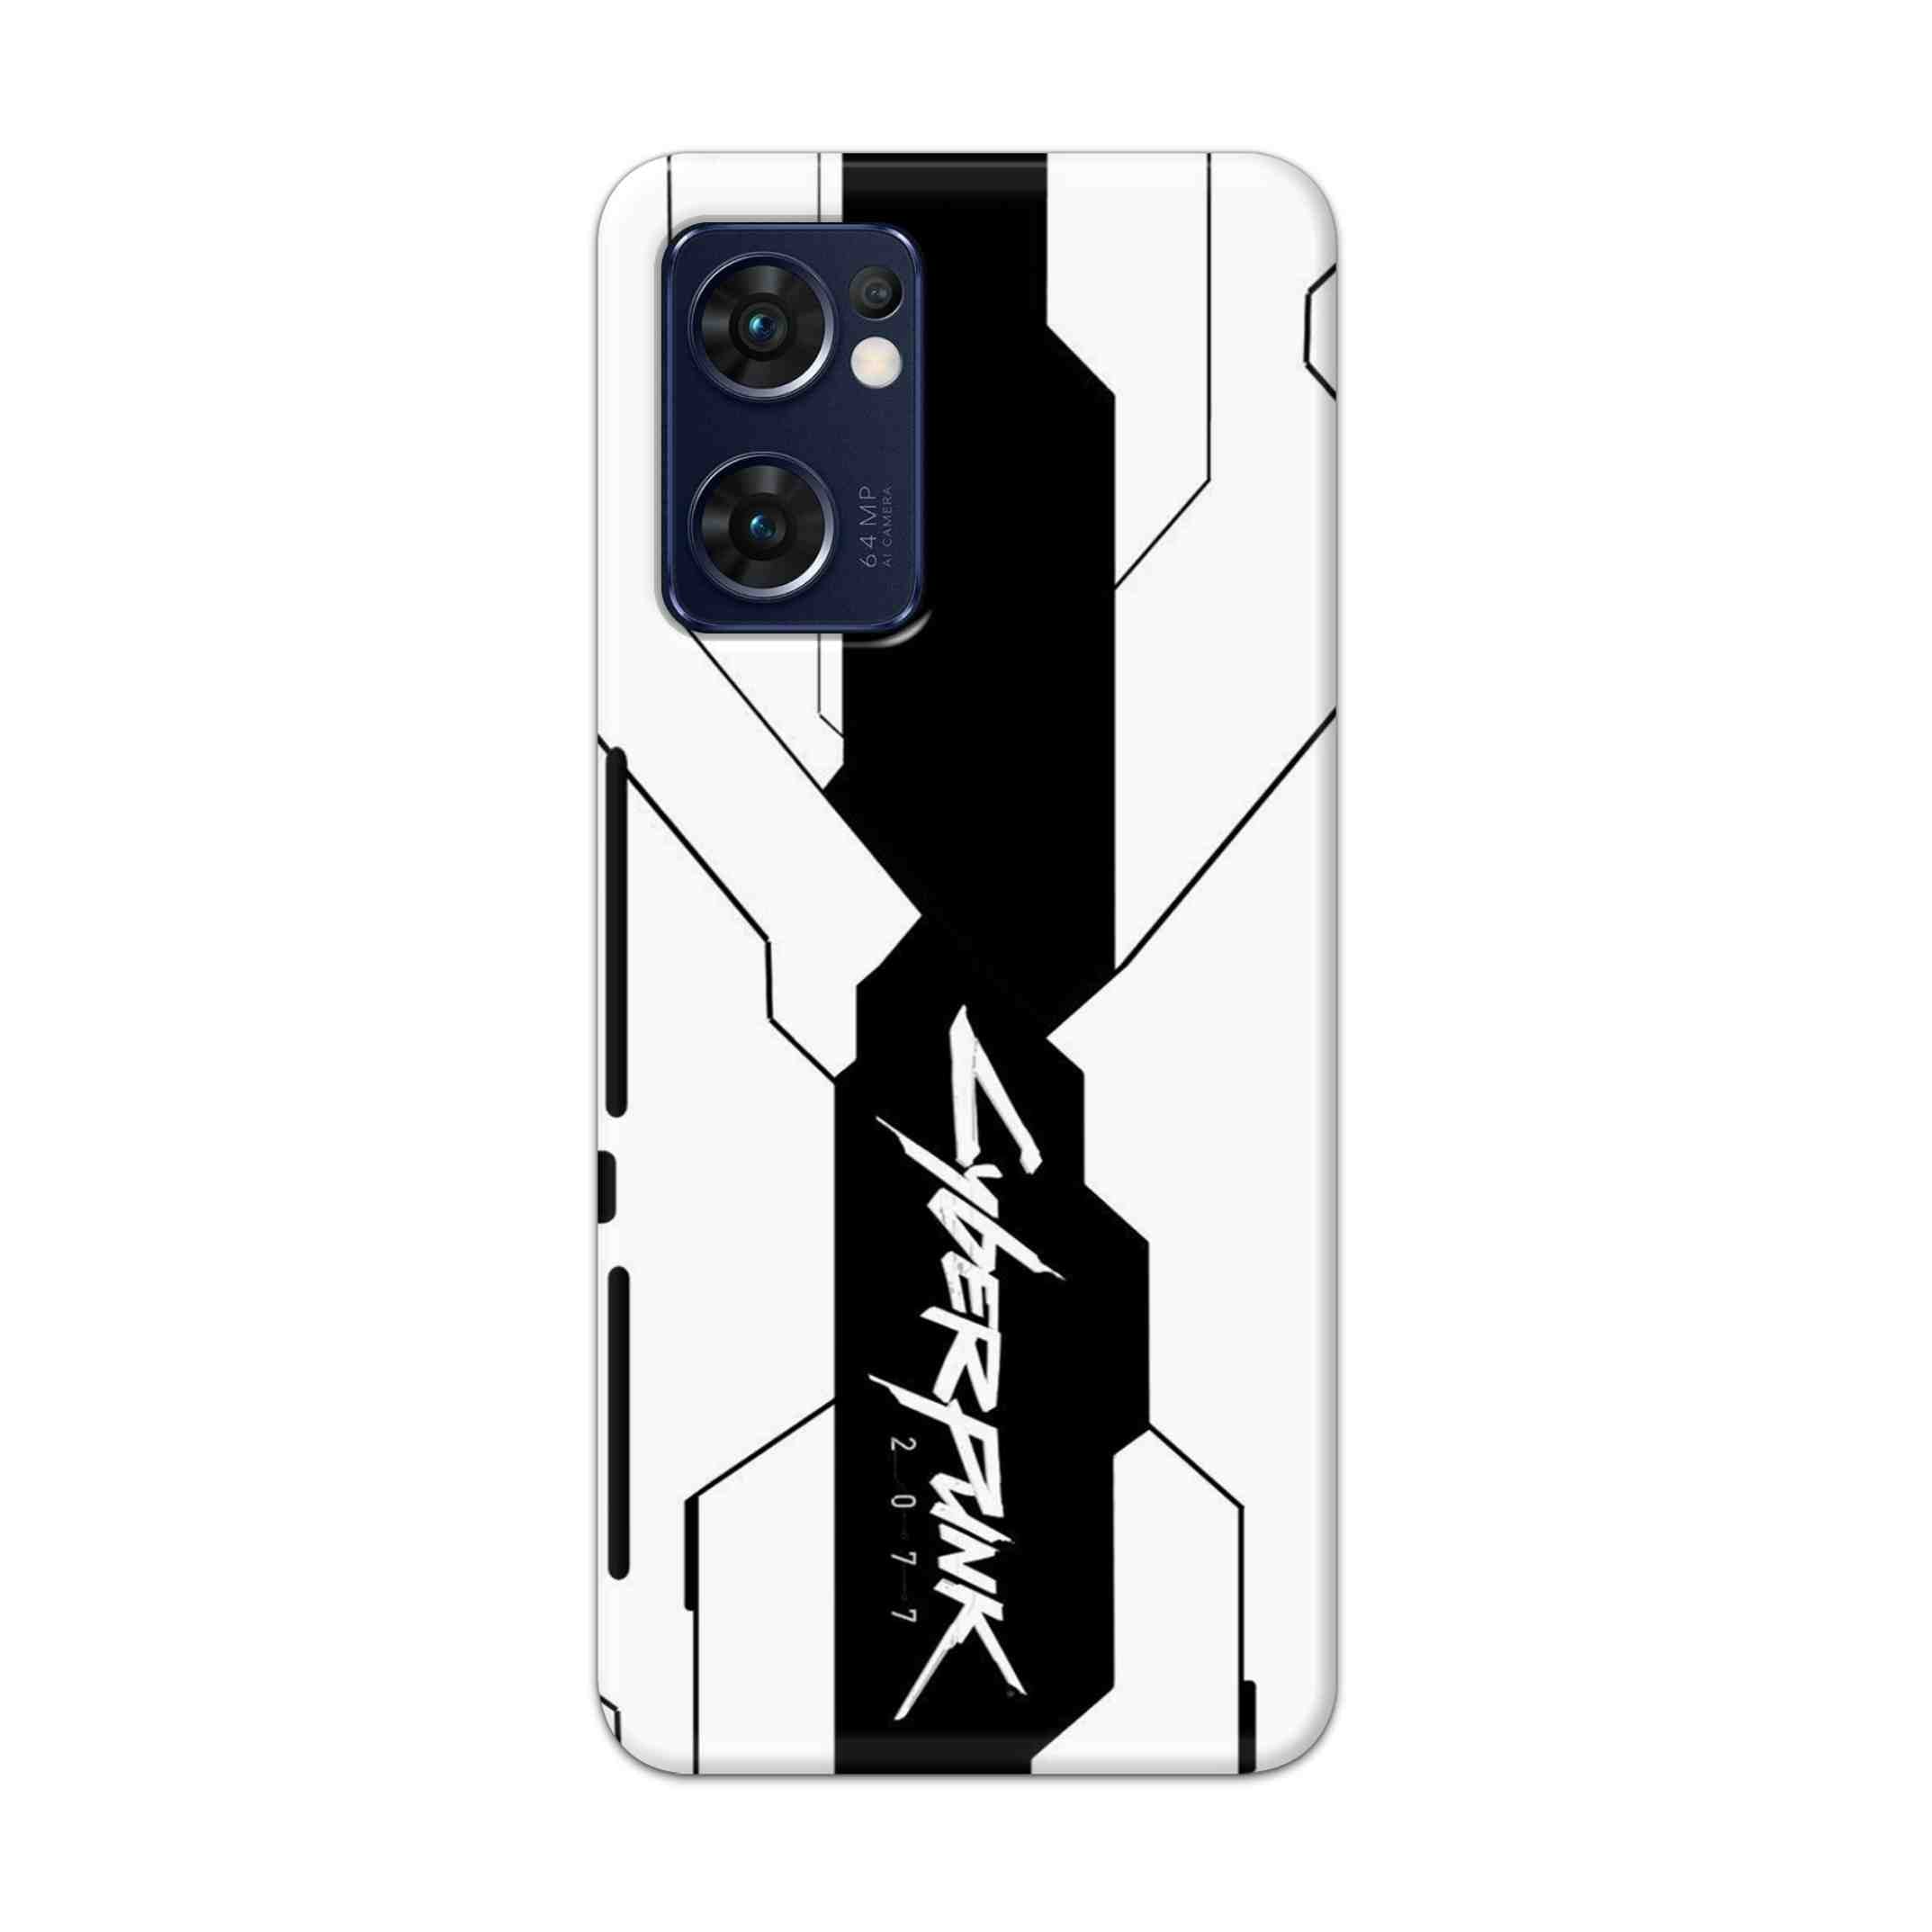 Buy Cyberpunk 2077 Hard Back Mobile Phone Case Cover For Reno 7 5G Online